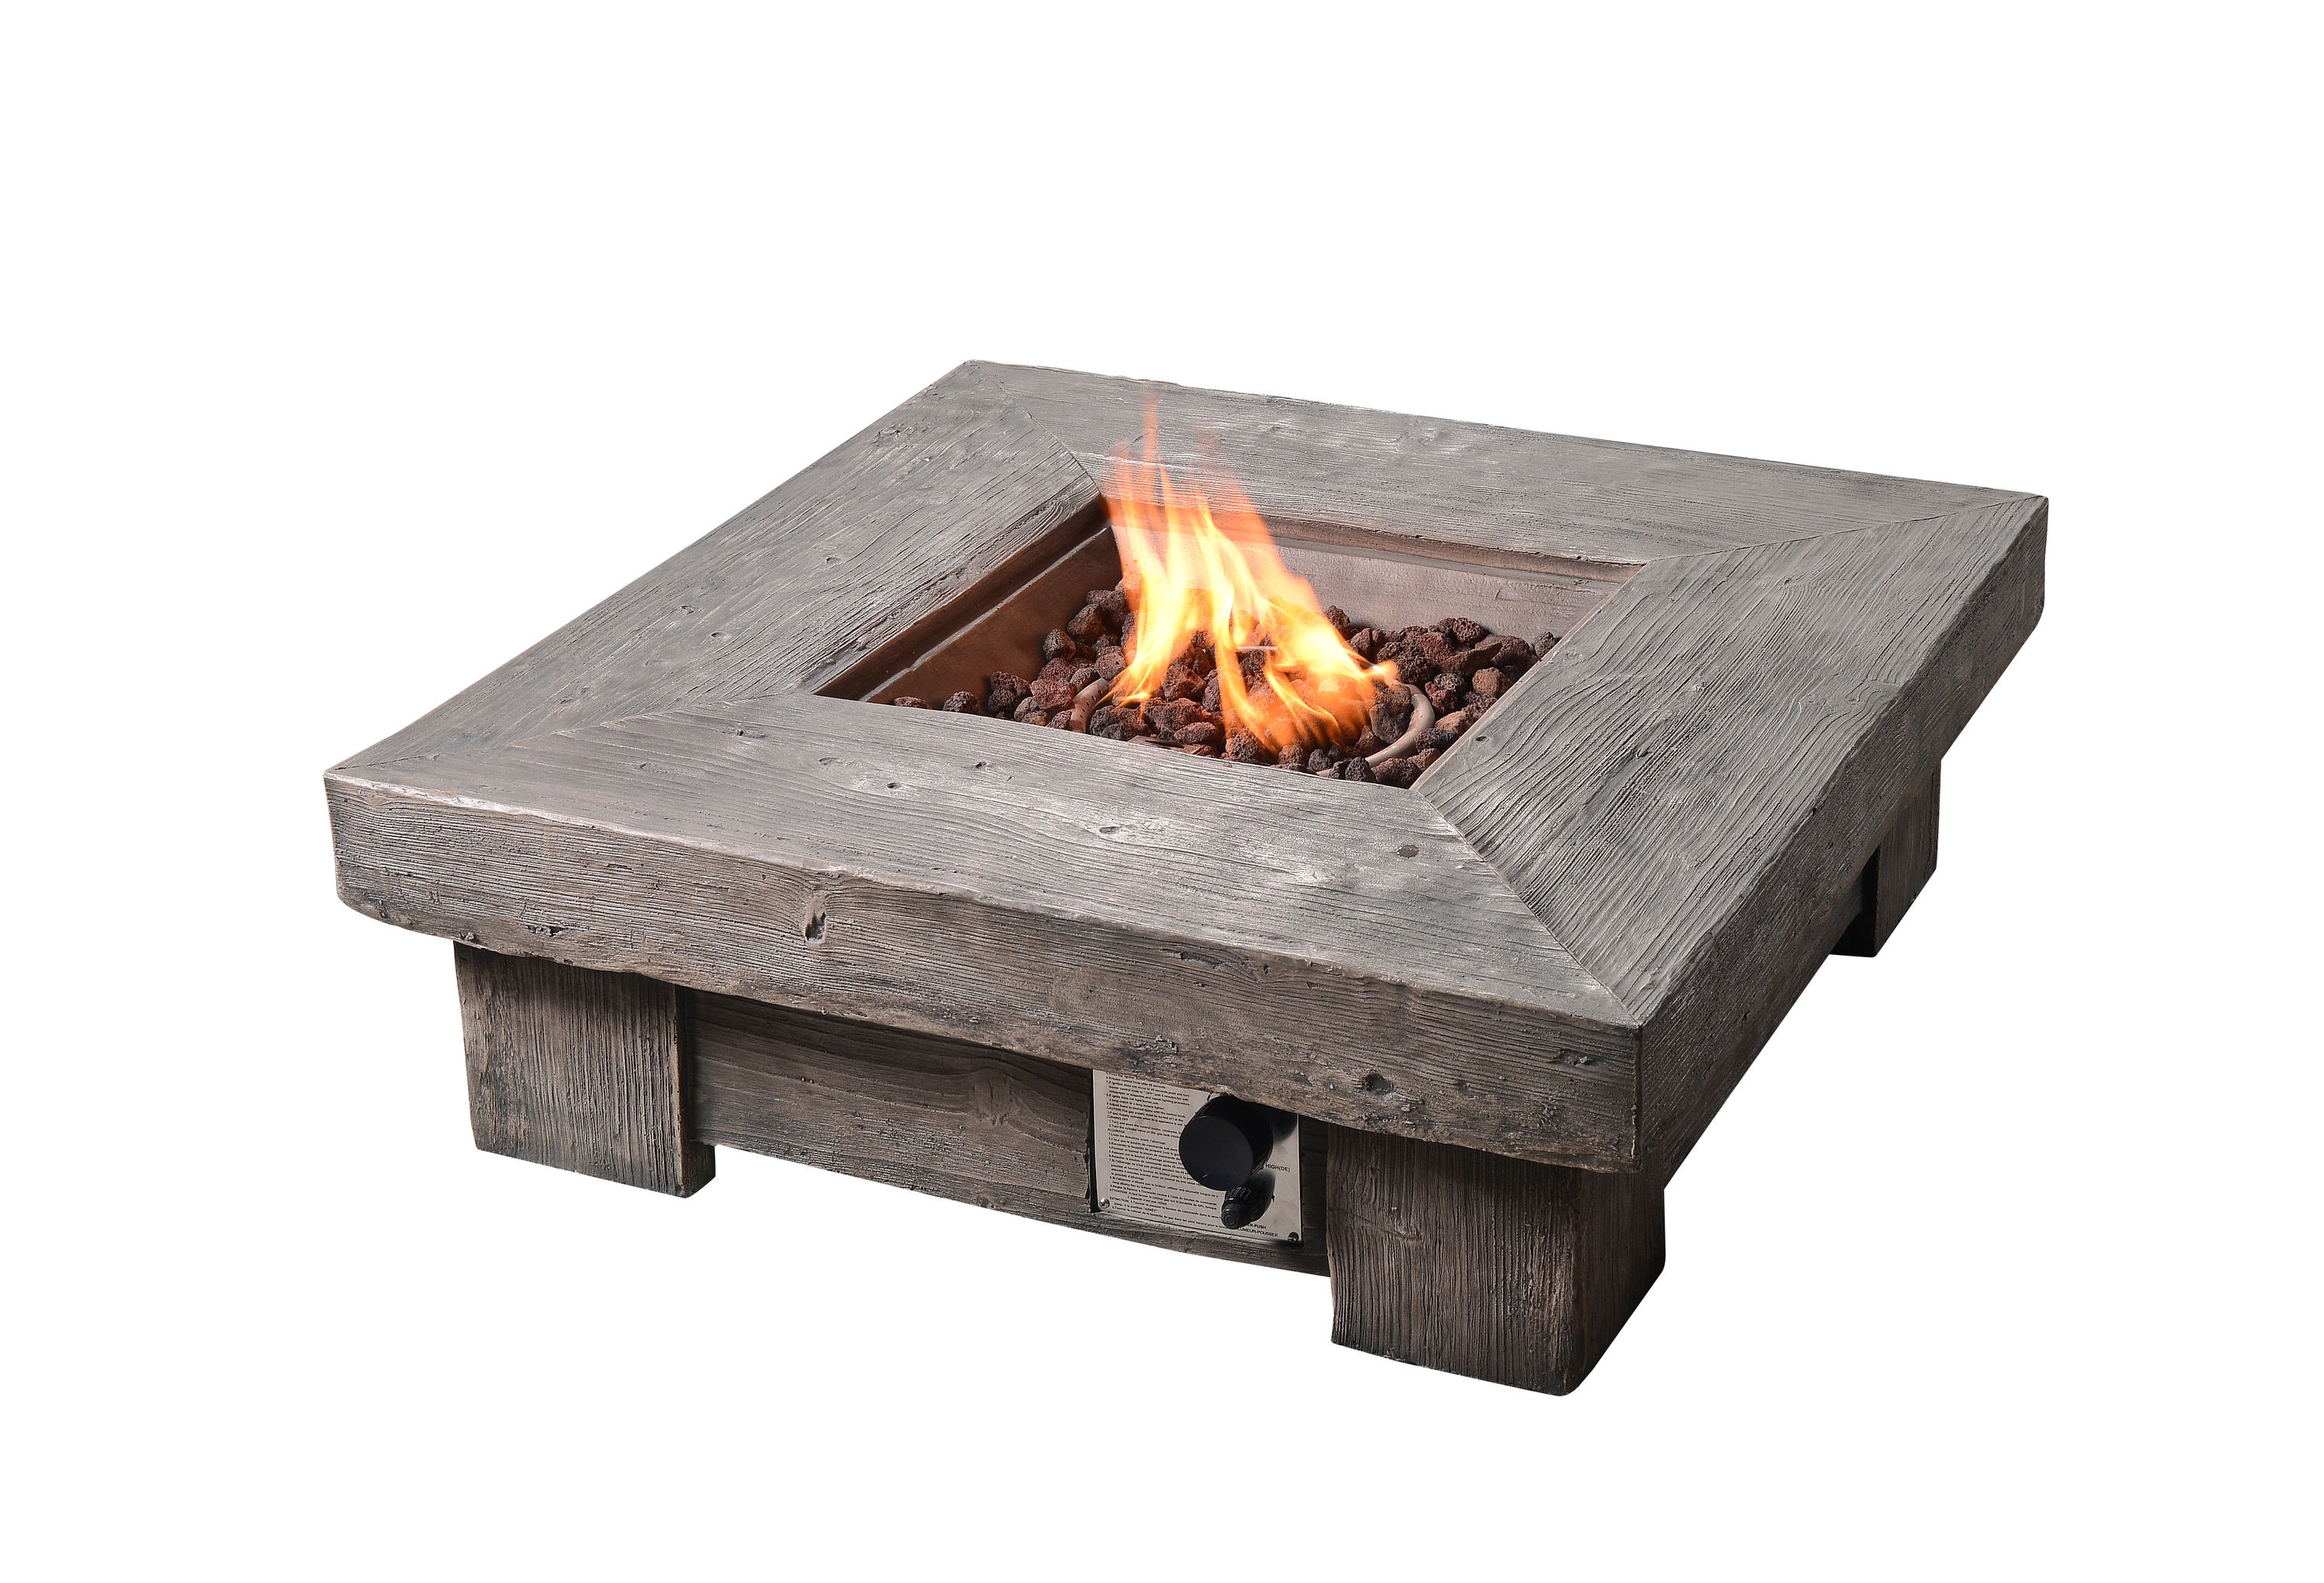 Wood Composite Propane Gas Fire Pit, How To Light Tabletop Fire Pit